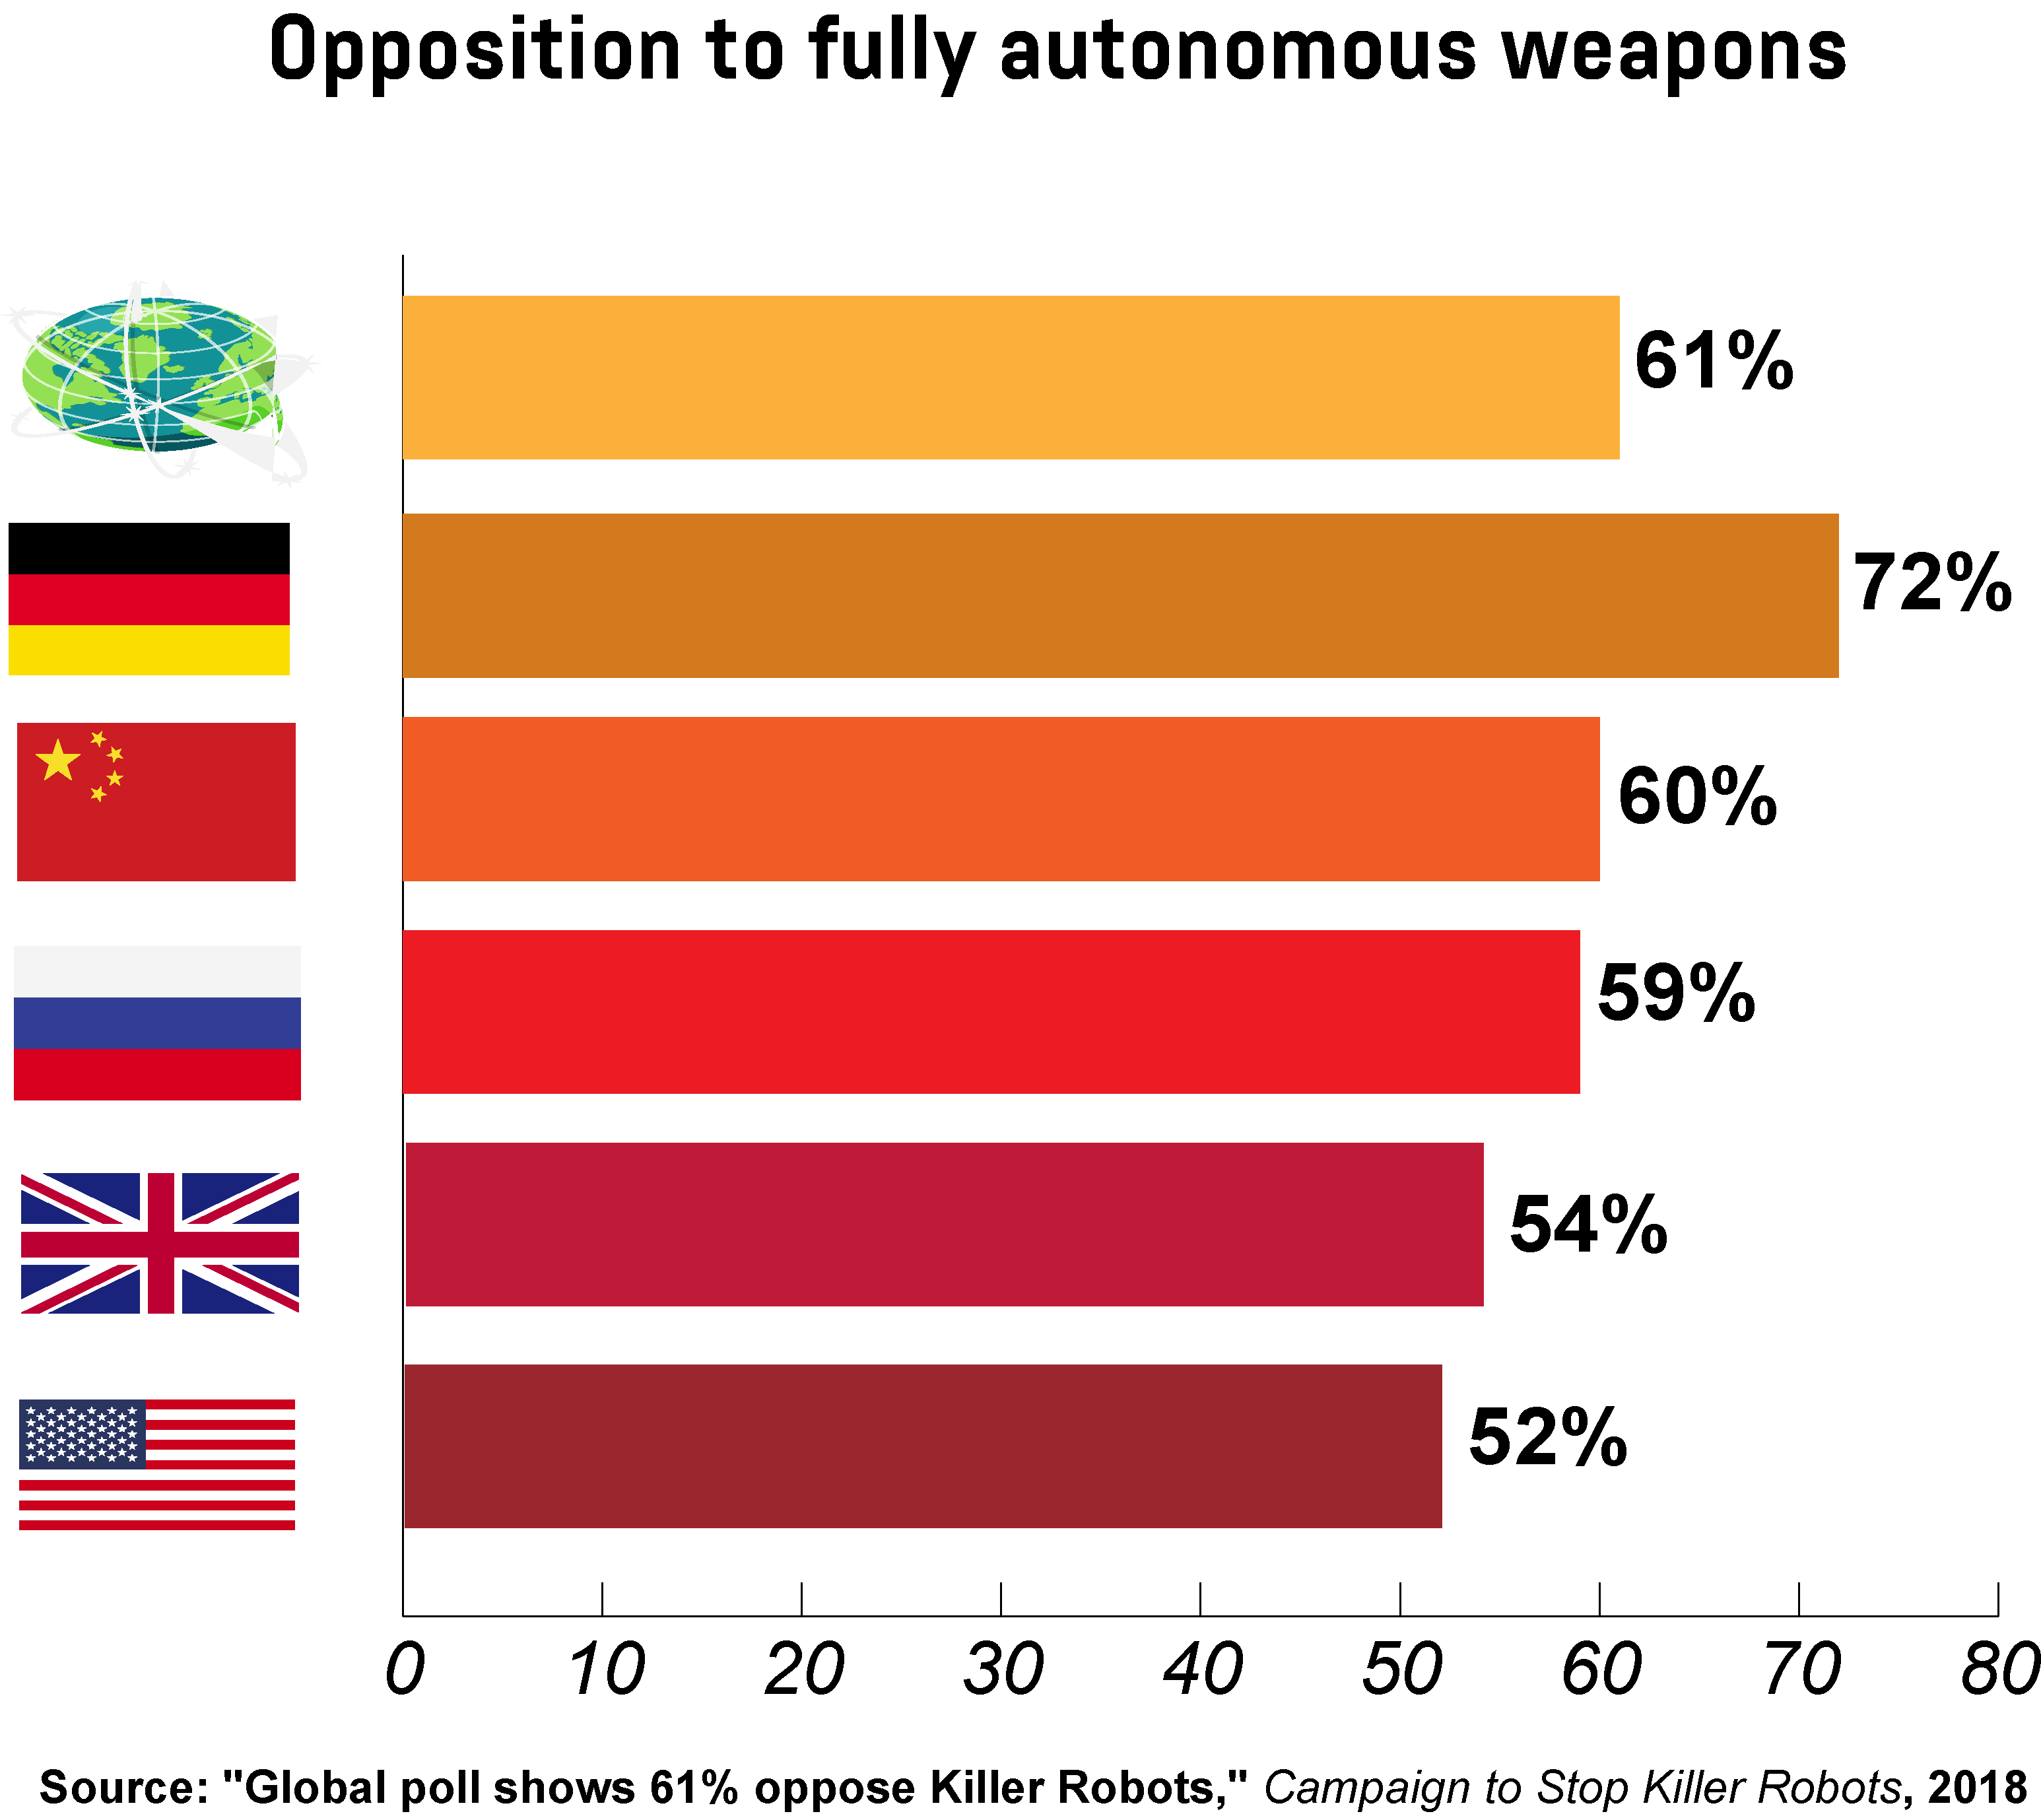 A graph showing the percentage of the population in various countries opposing fully autonomous weapons.